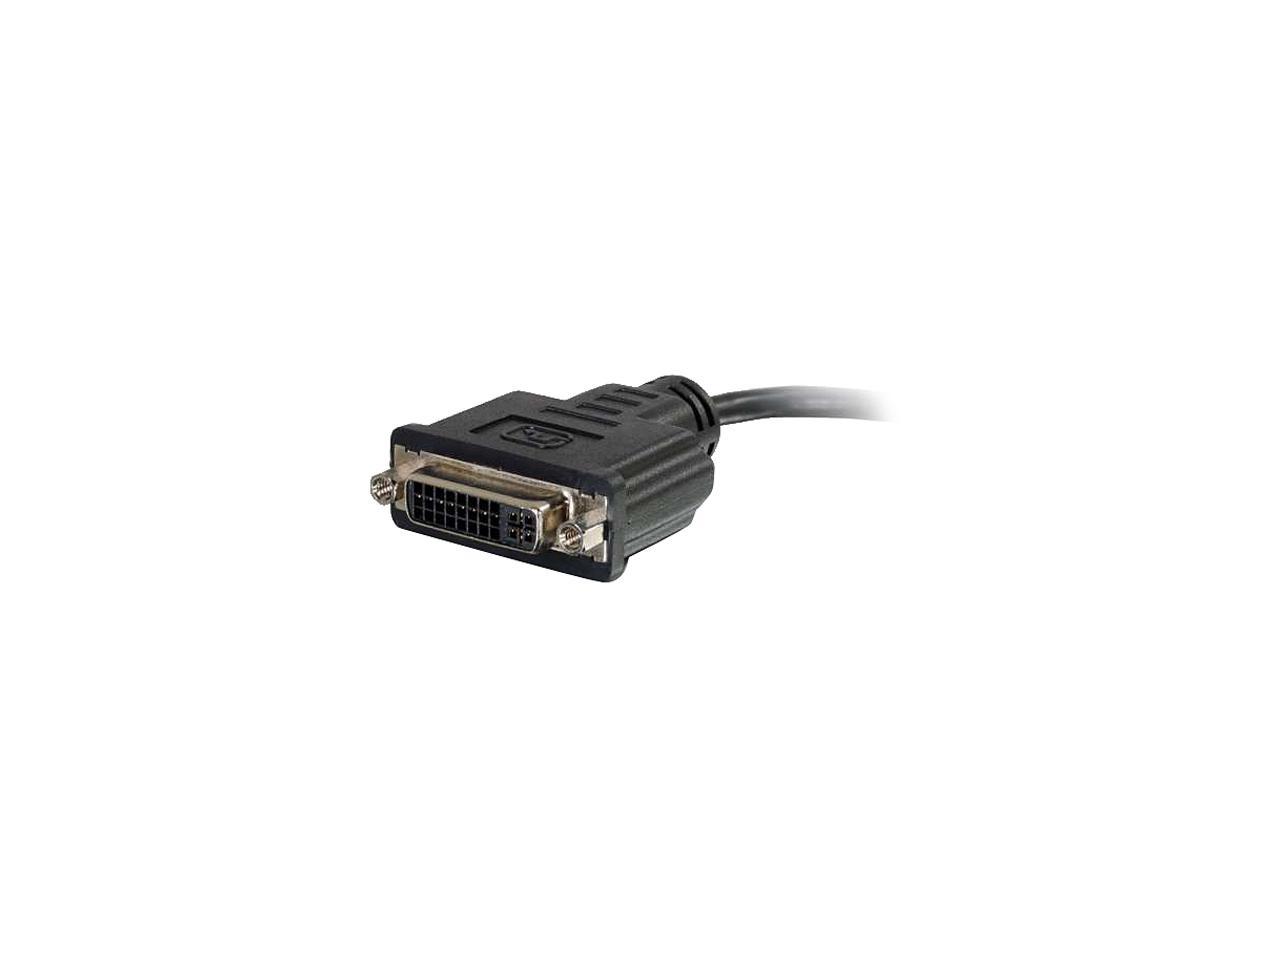 C2g 8In Hdmi To Dvi Adapter Converter Dongle - M/F Black - image 2 of 3